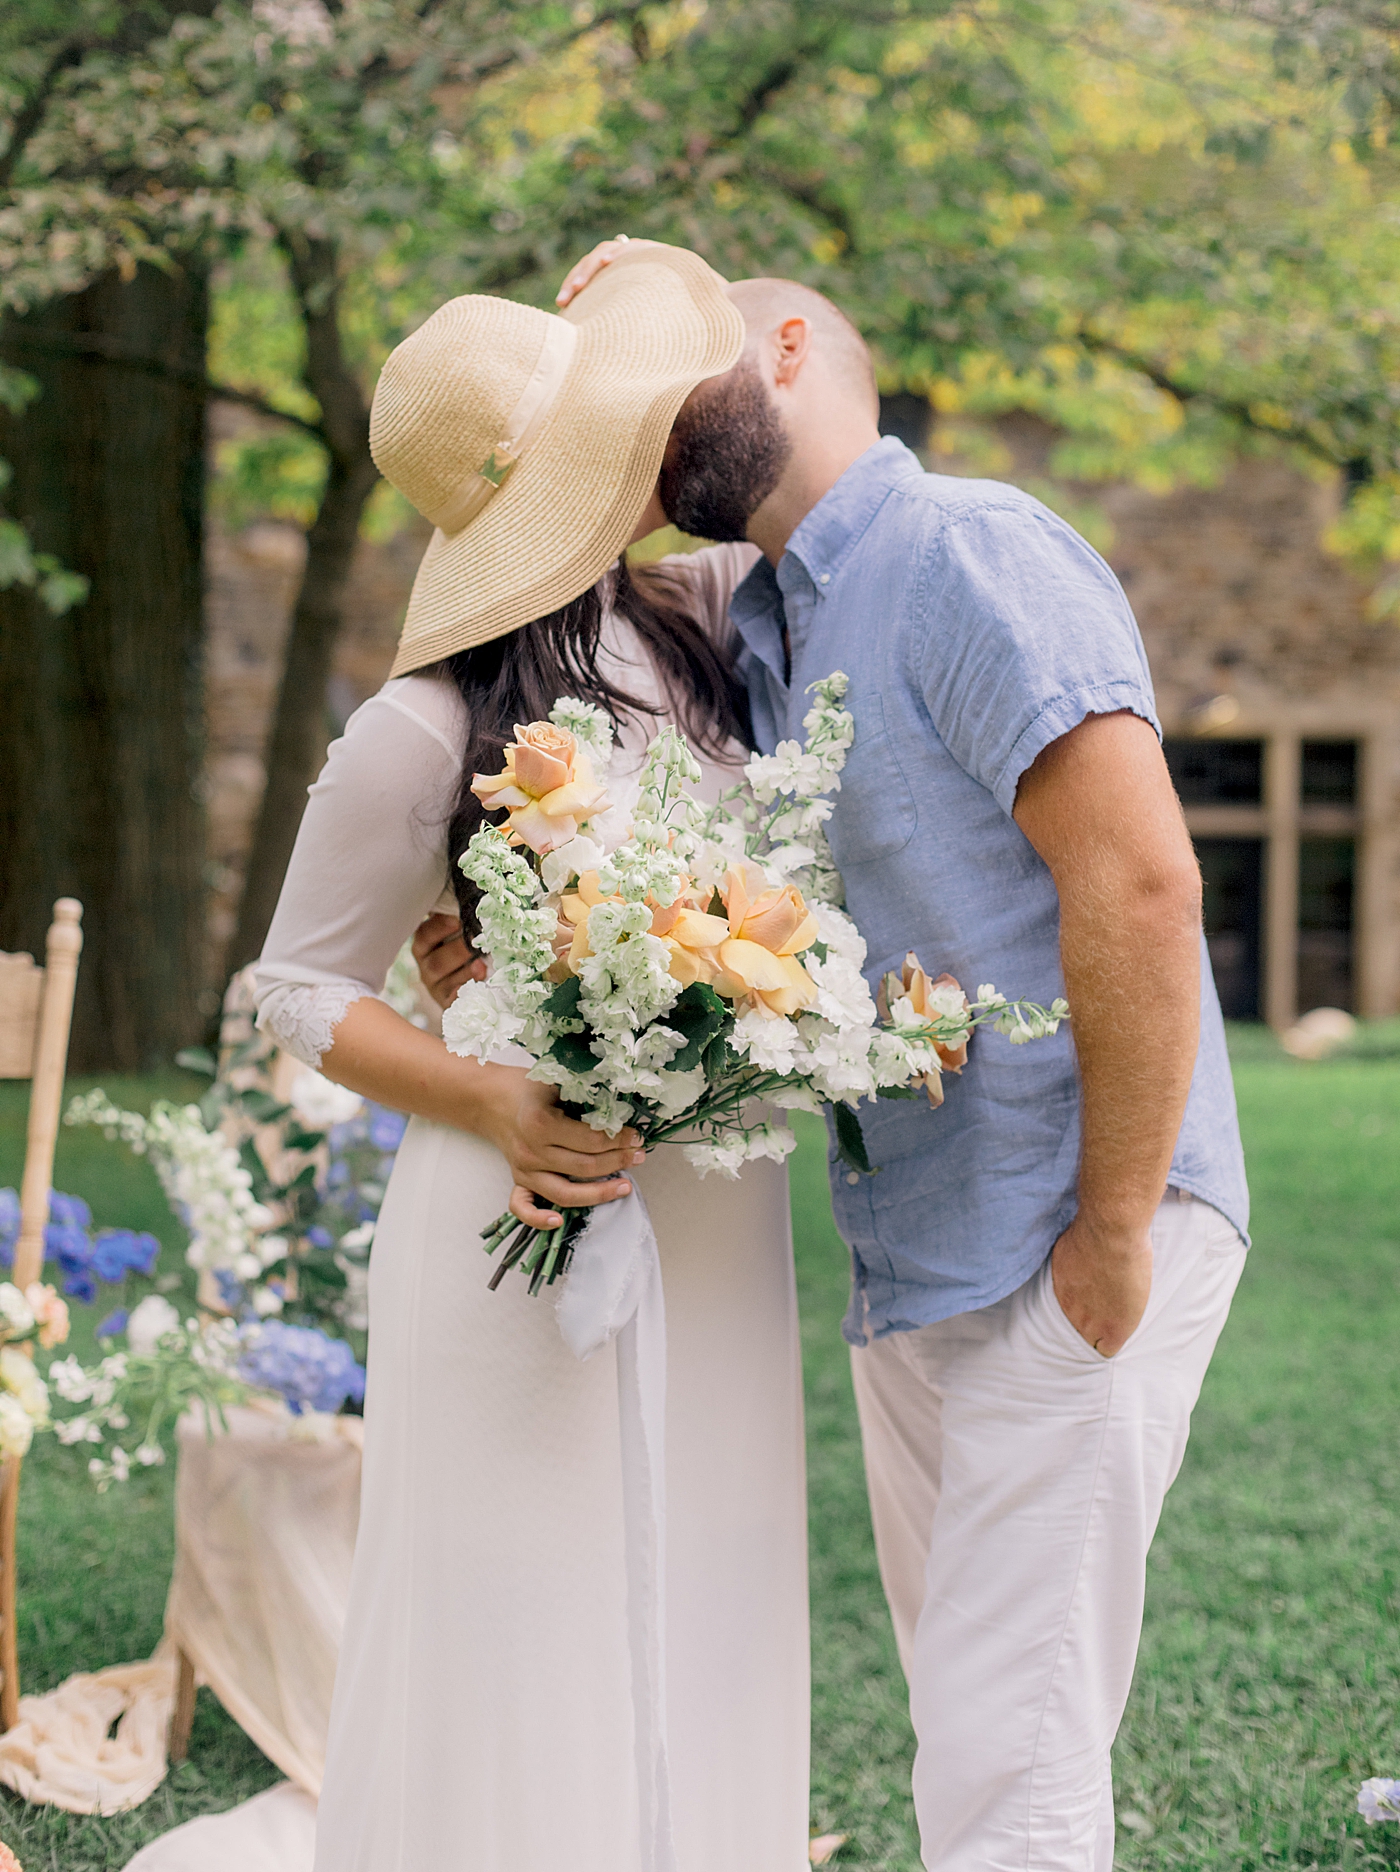 Bride holding a bouquet and wearing a hat kissing her groom | Image by Hope Helmuth Photography